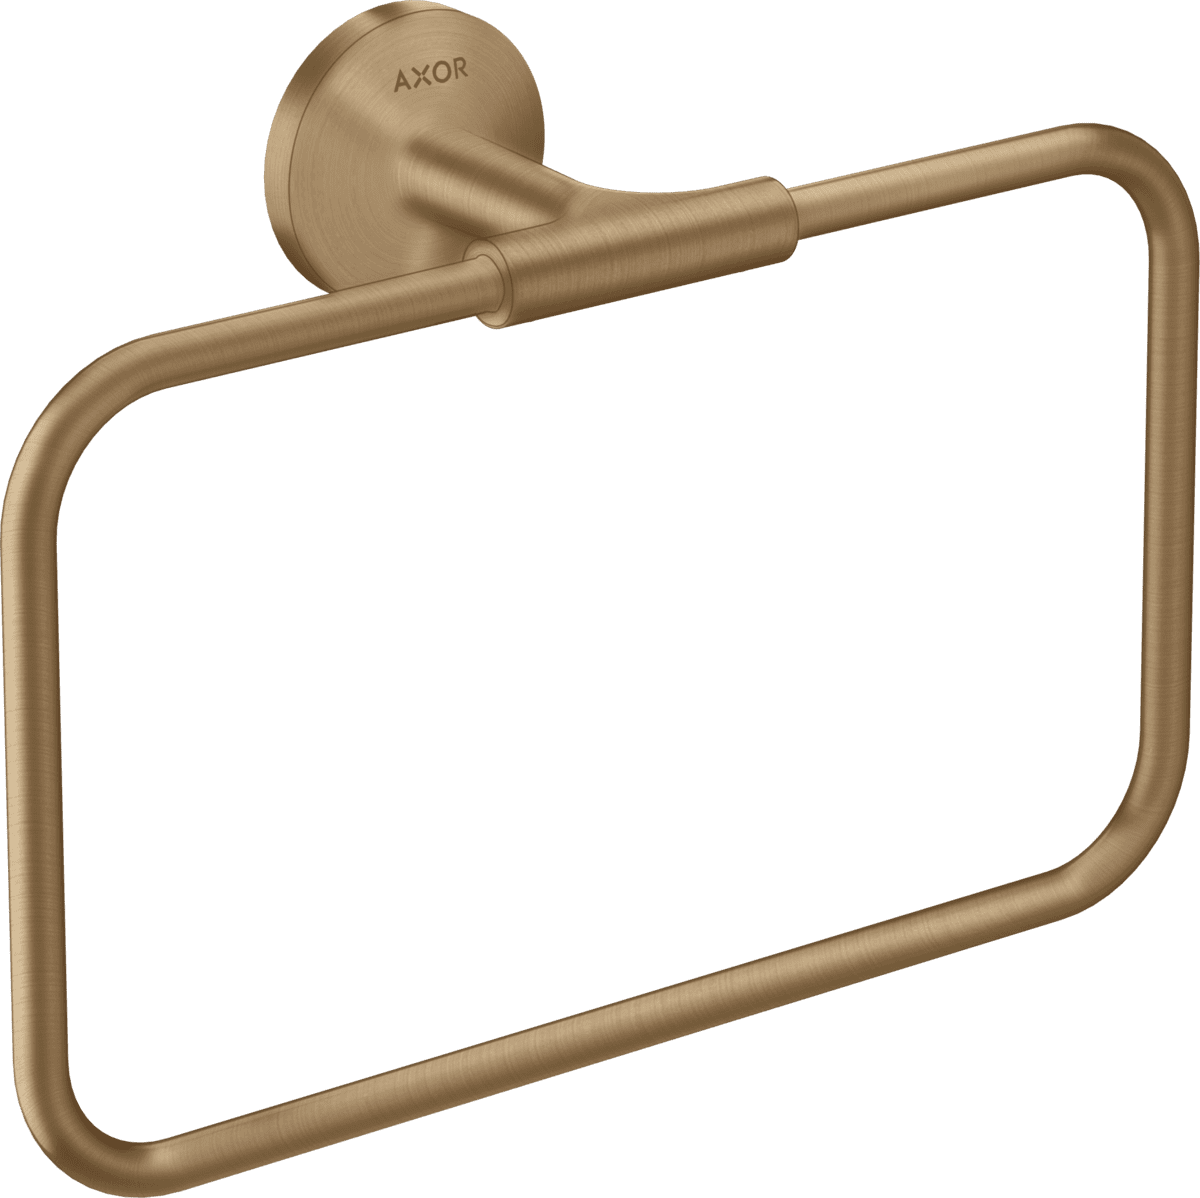 Picture of HANSGROHE AXOR Universal Circular Towel ring #42823140 - Brushed Bronze